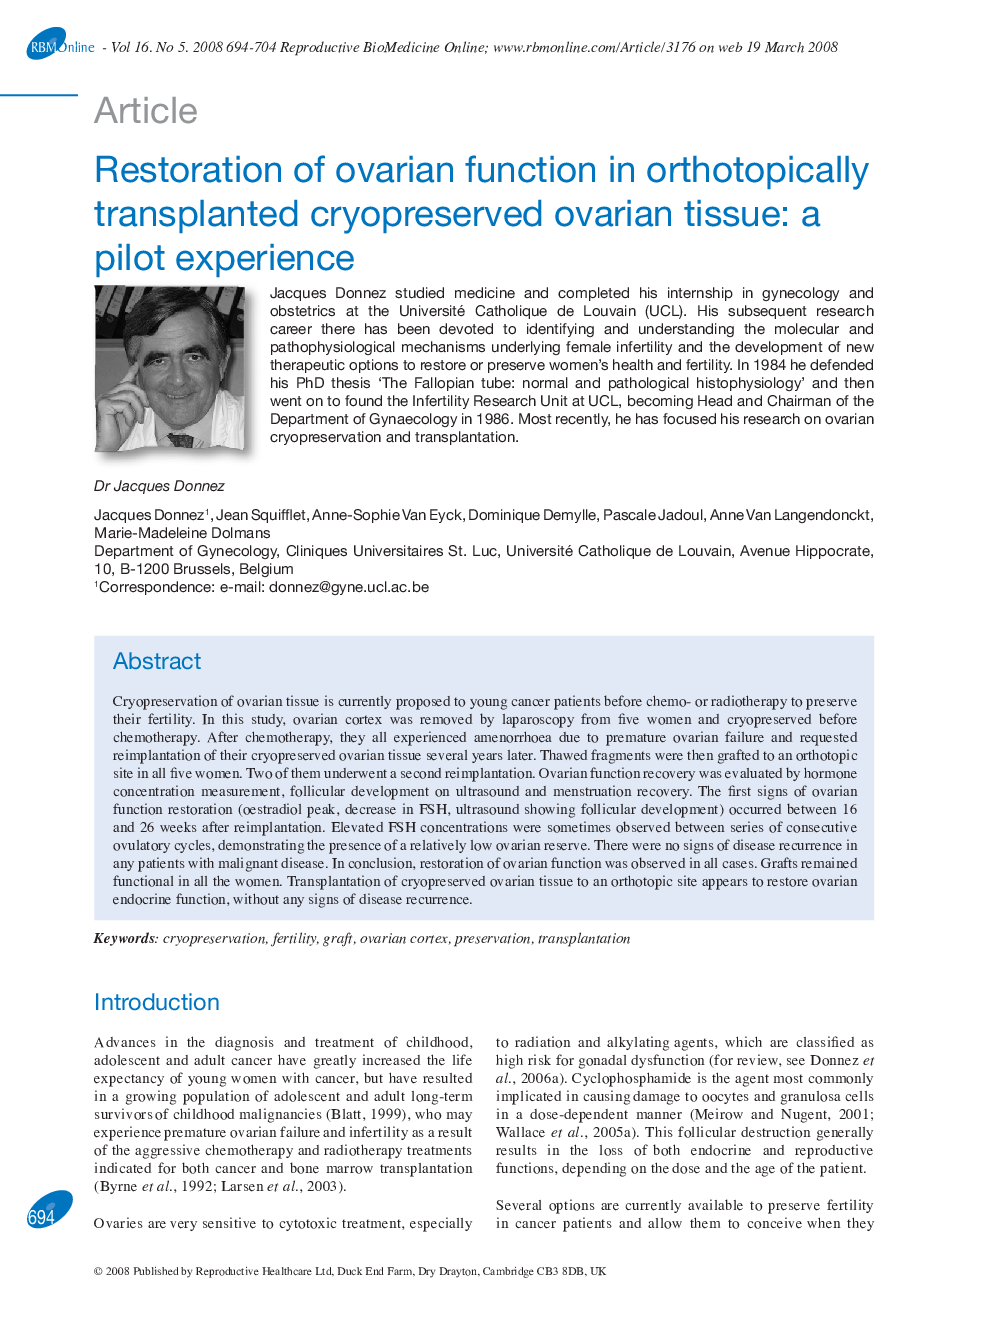 Restoration of ovarian function in orthotopically transplanted cryopreserved ovarian tissue: a pilot experience 